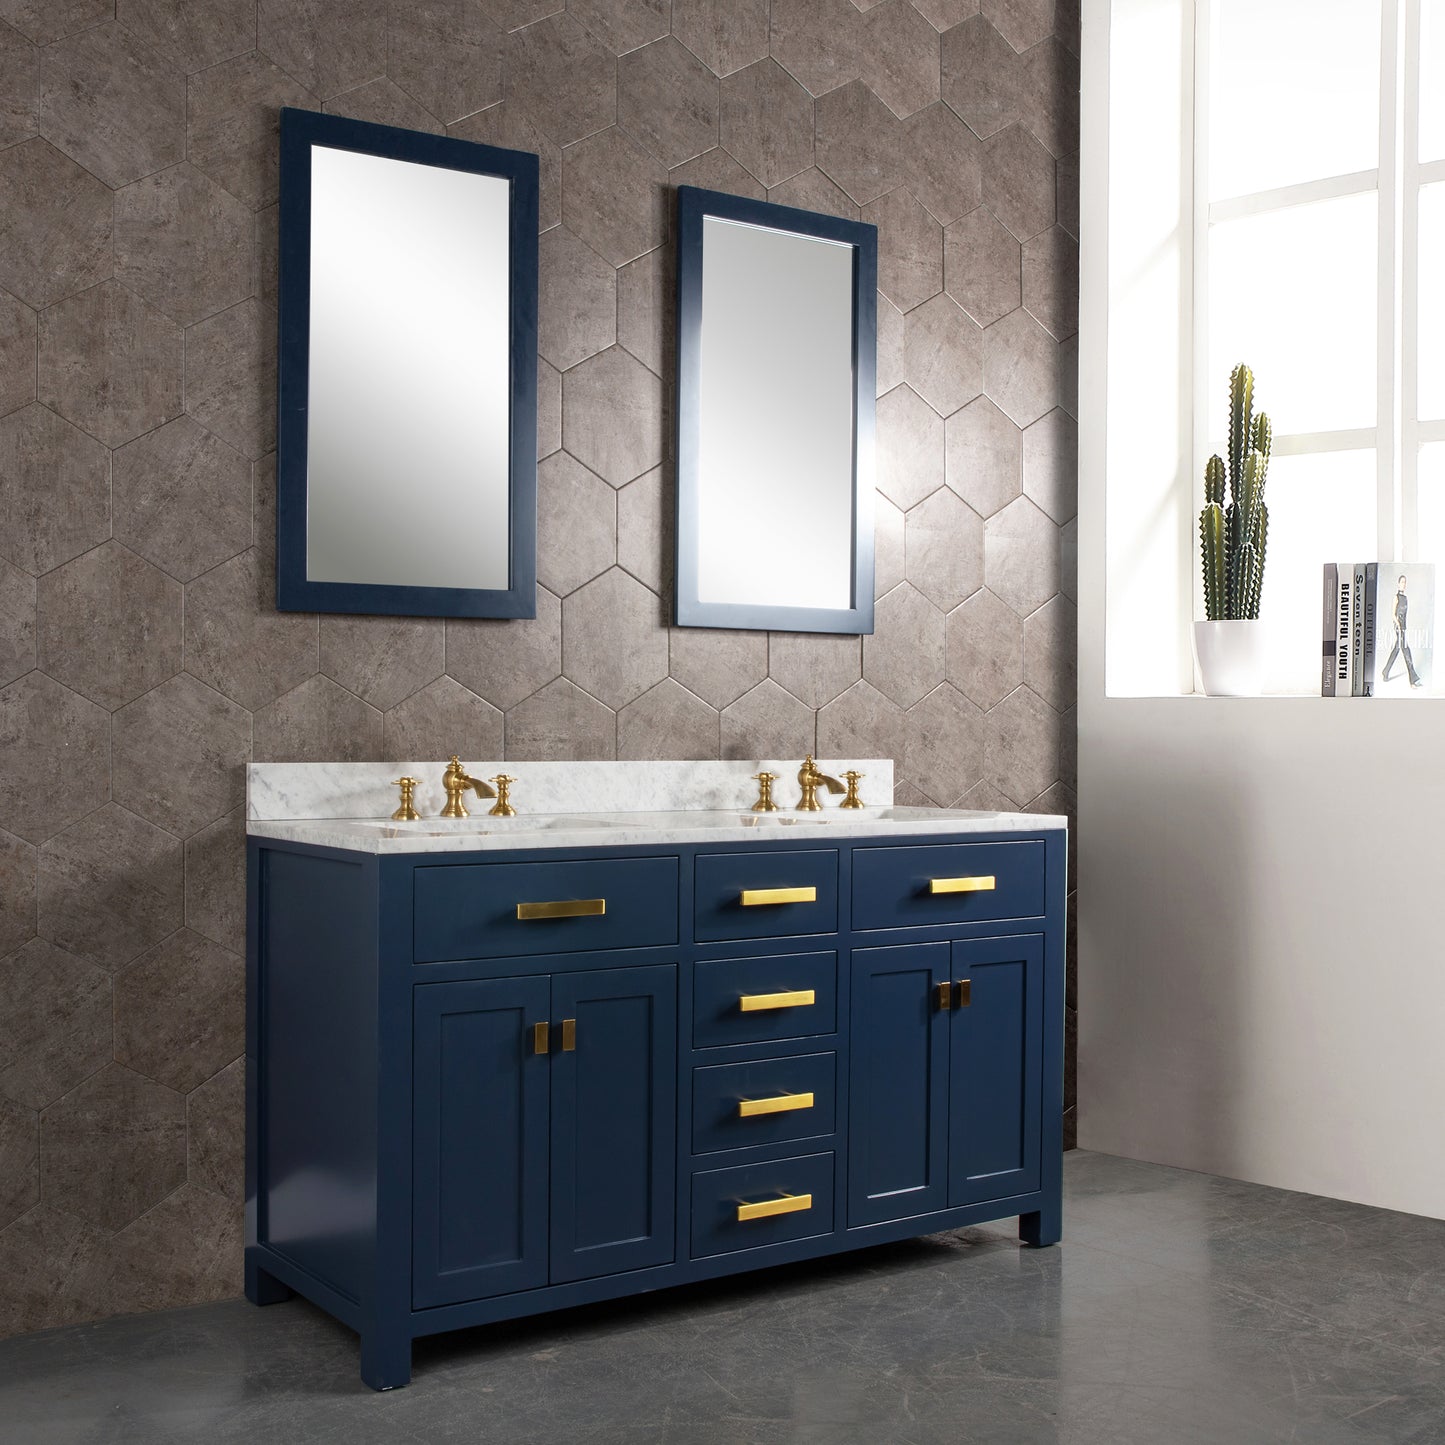 Water Creation Madison 60" Inch Double Sink Carrara White Marble Vanity In Monarch Blue with Matching Mirror - Luxe Bathroom Vanities